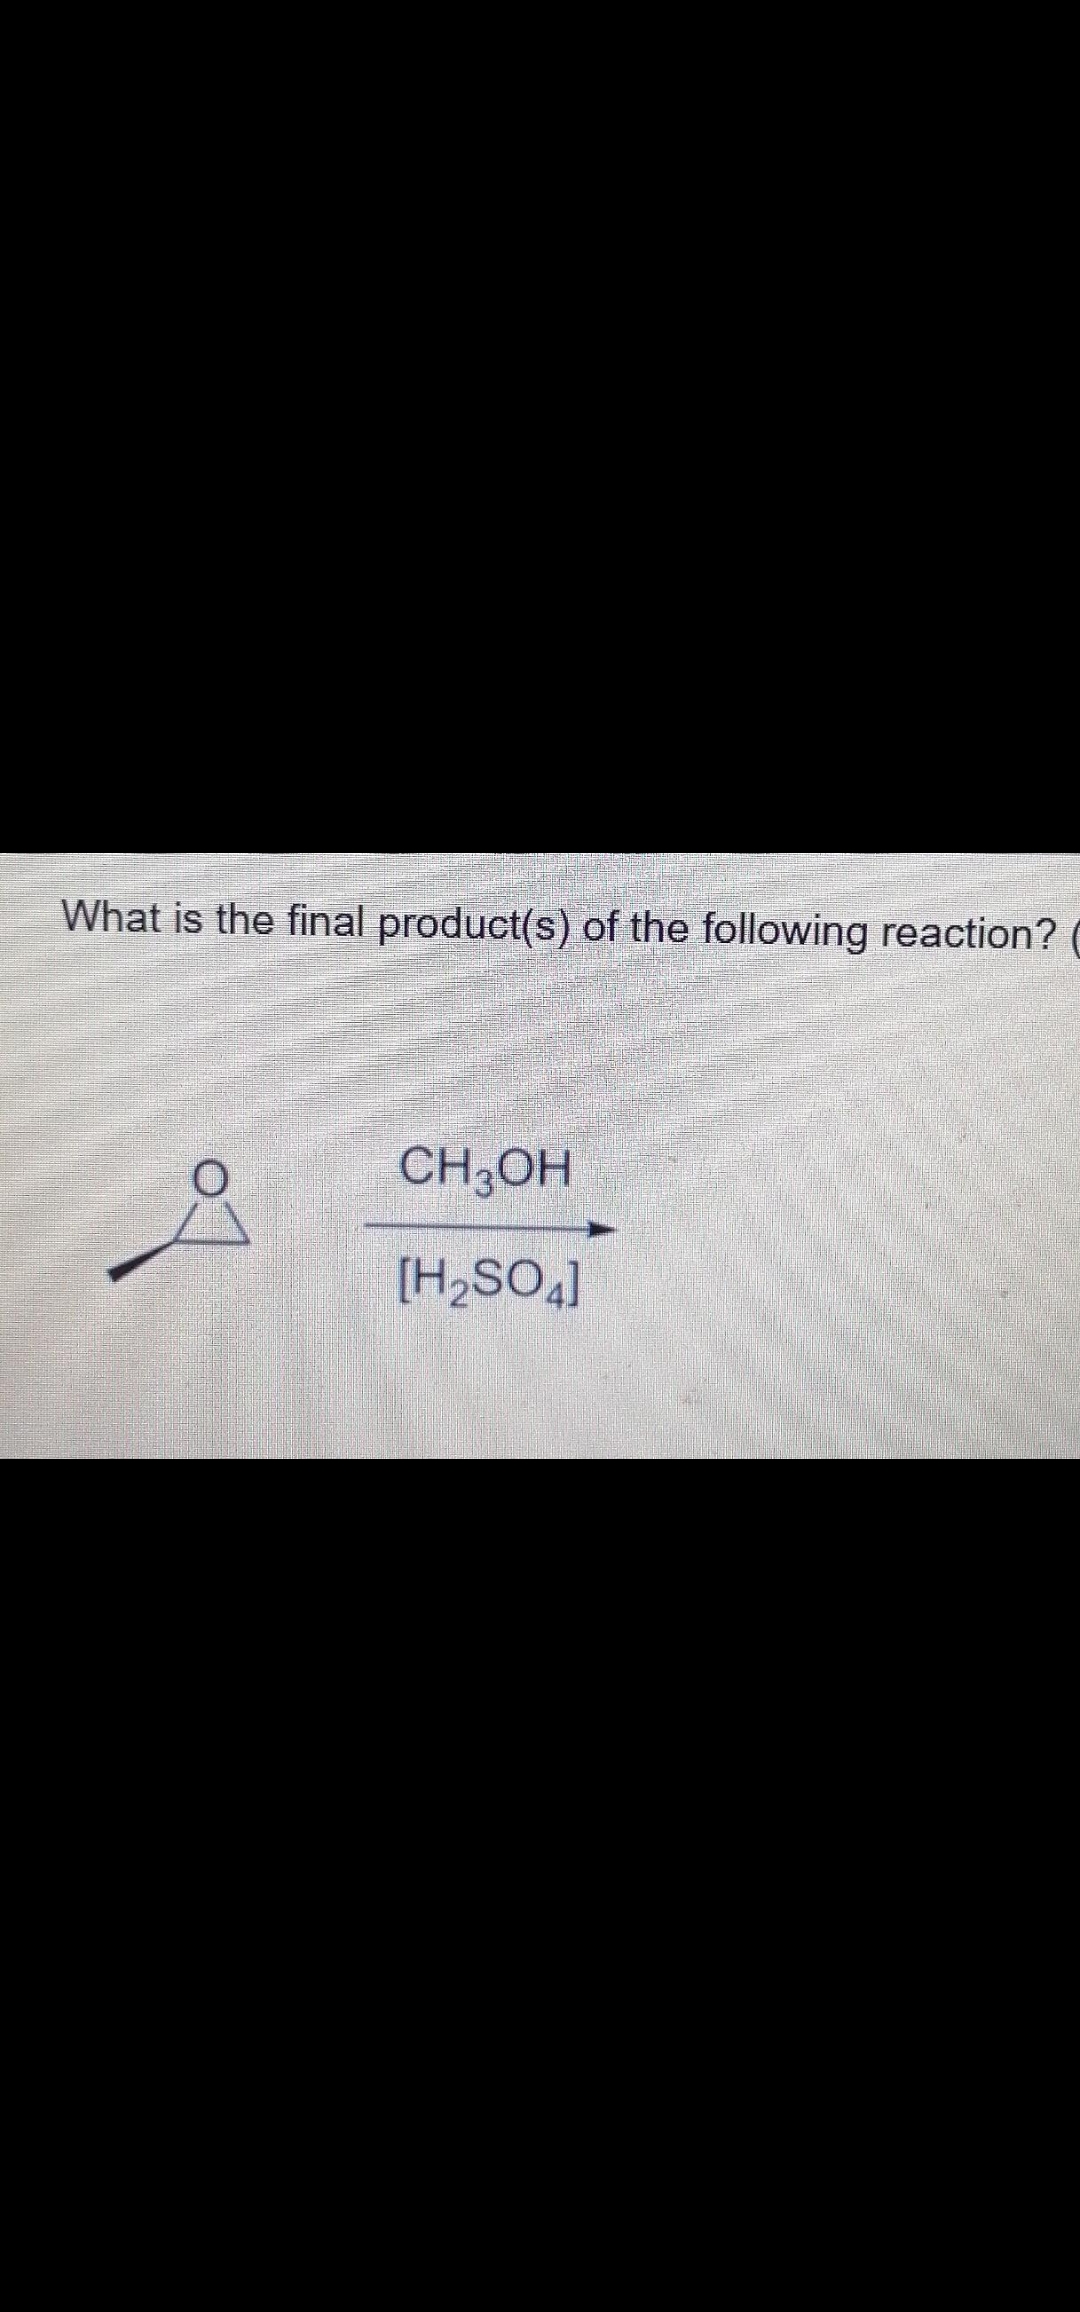 What is the final product(s) of the following reaction?
CH;OH
[H,SO,]
